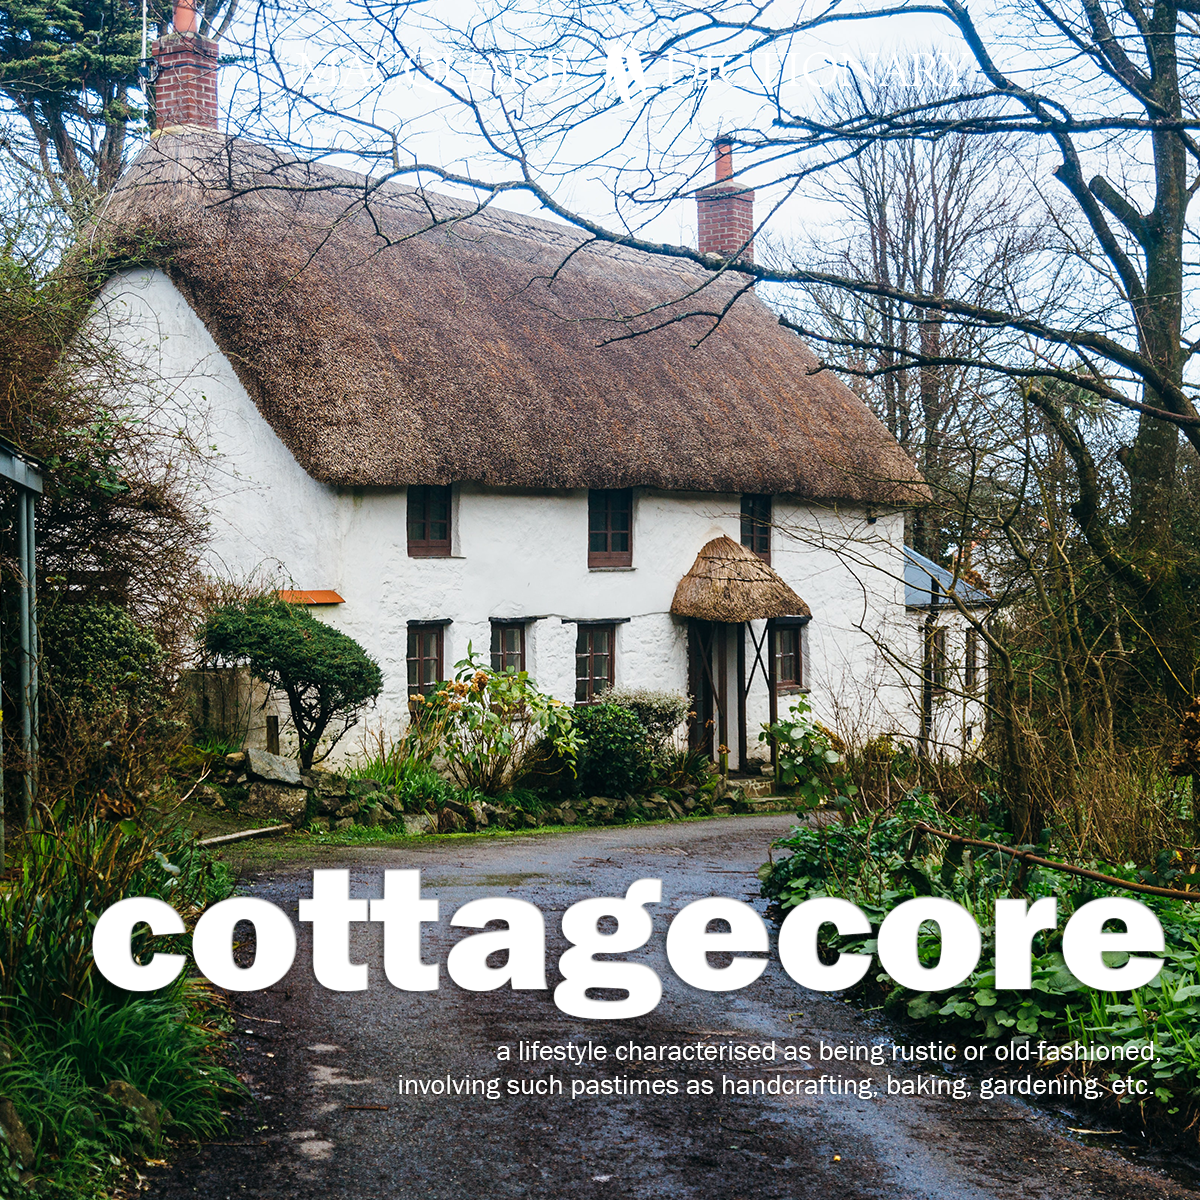 cottagecore - a lifestyle characterised as being rustic or old-fashioned, involving such pastimes as handcrafting, baking, gardening, etc. 